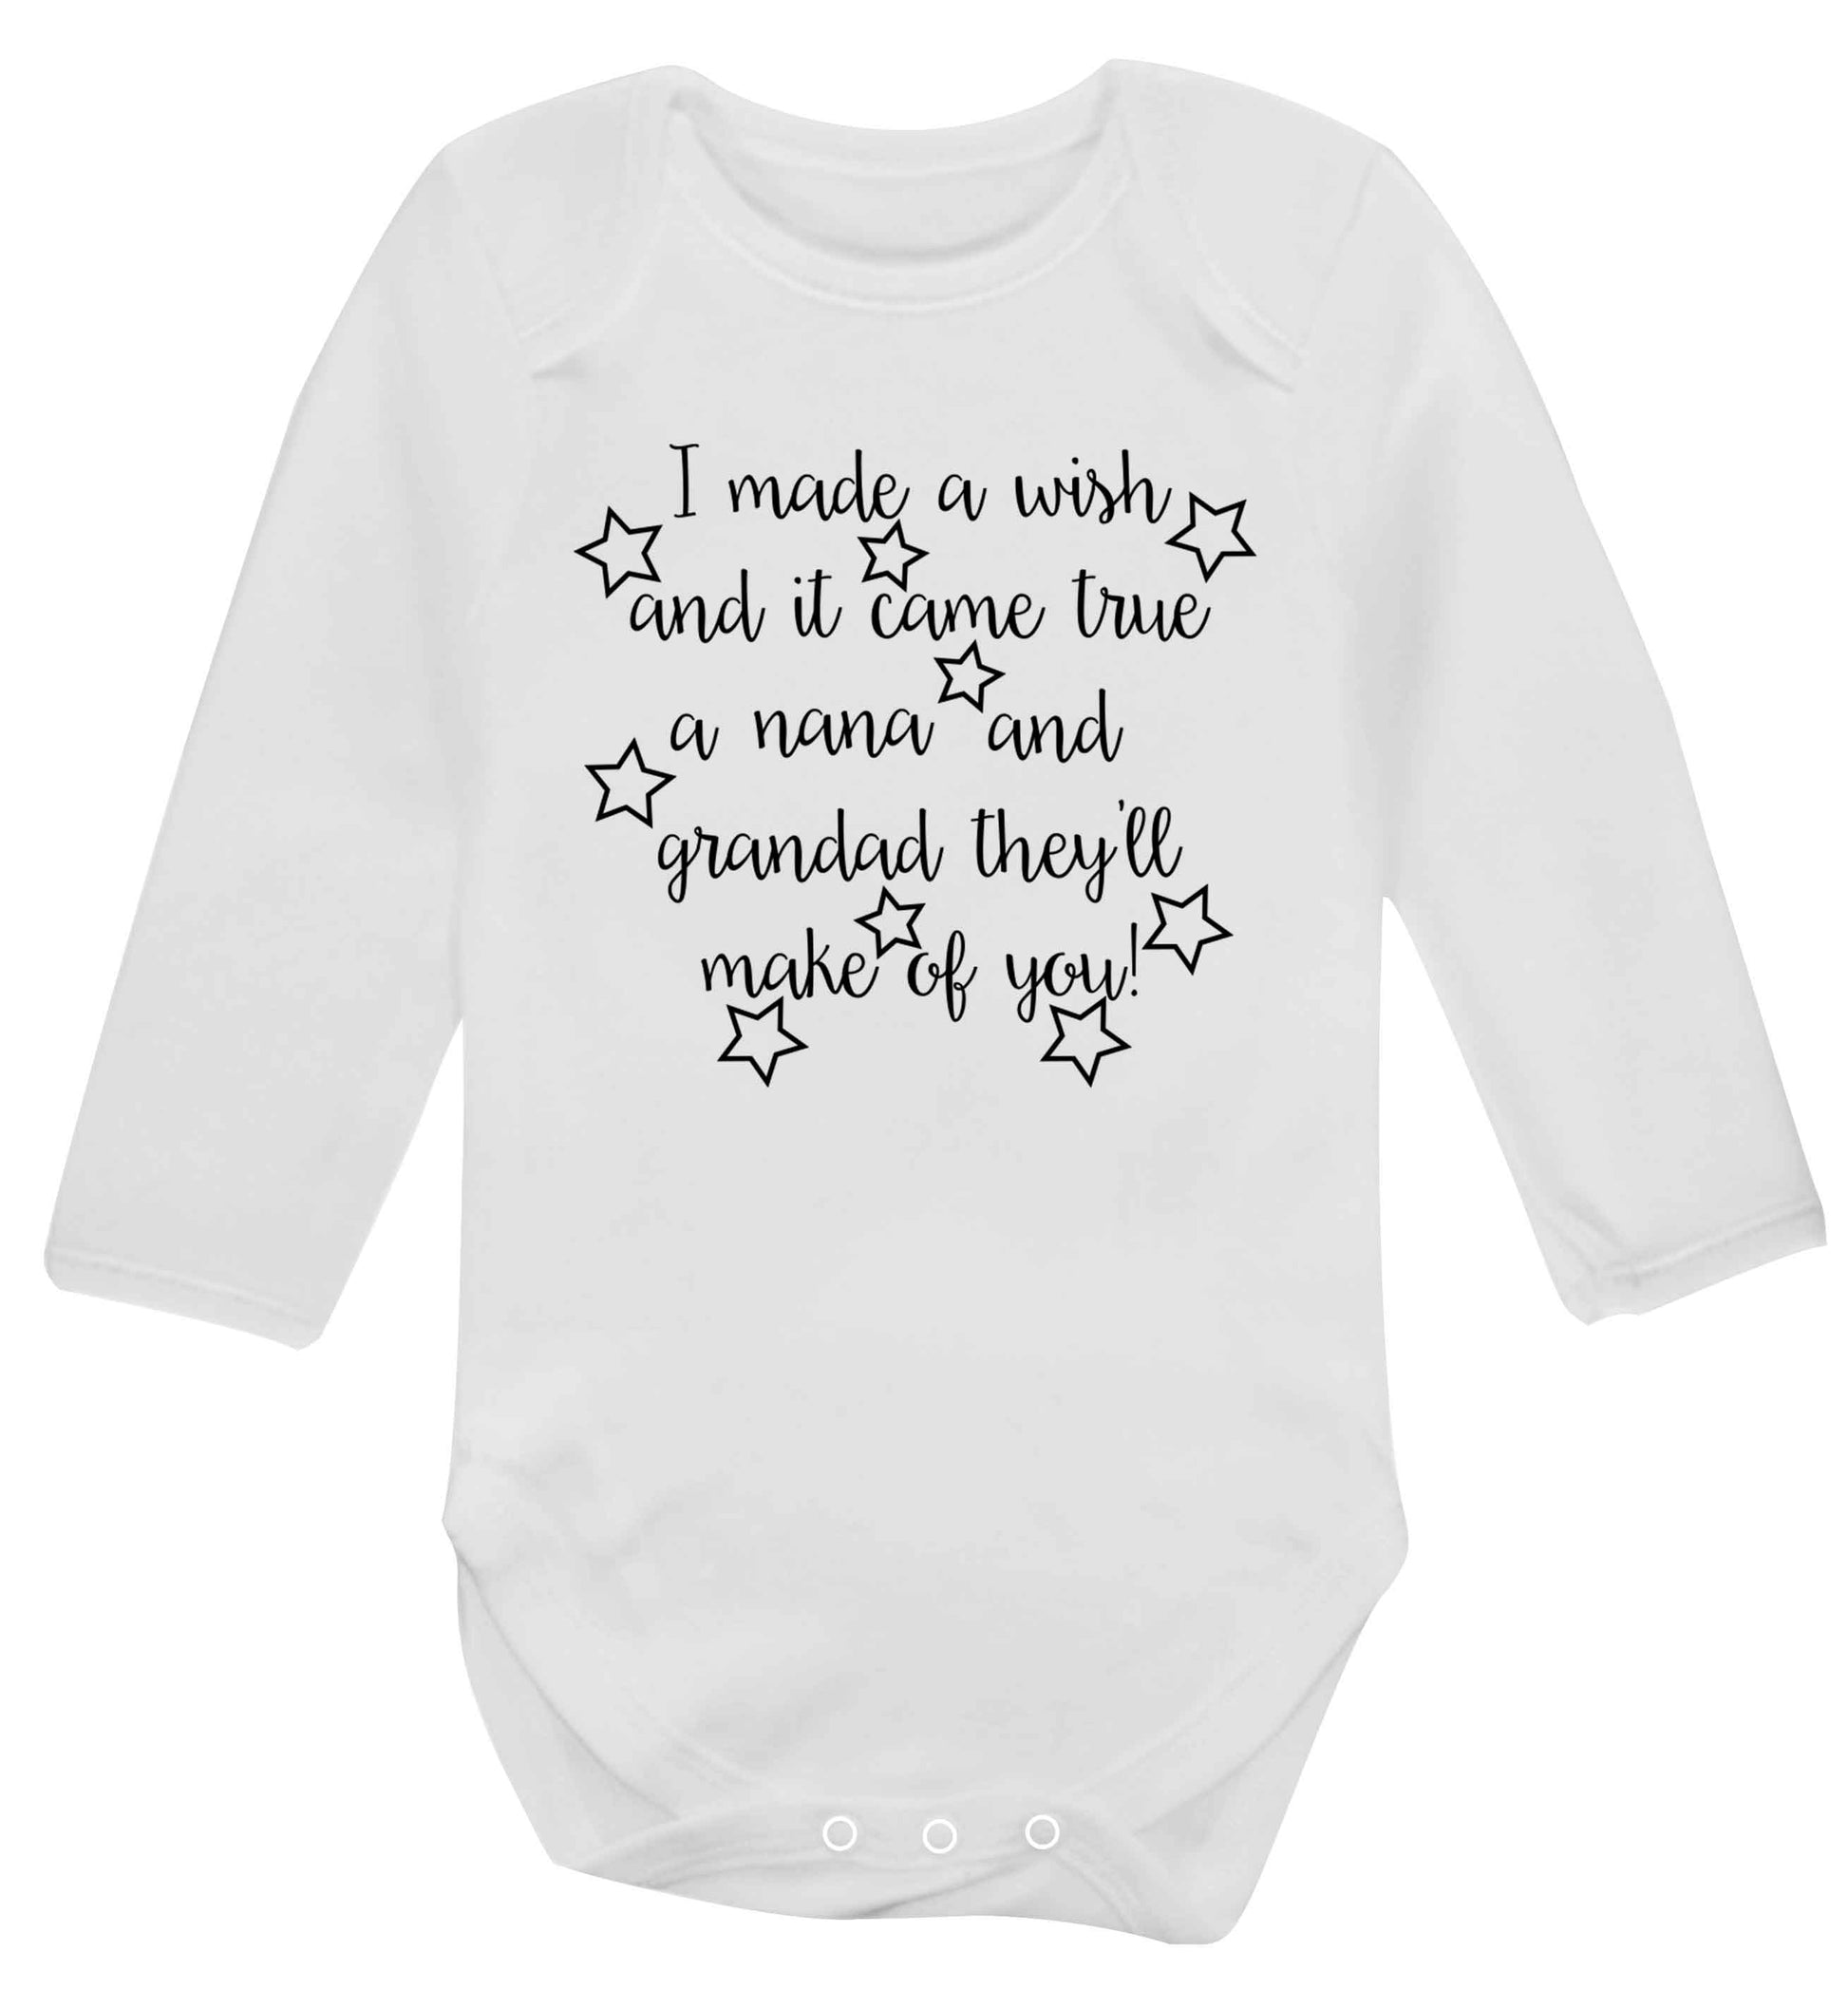 I made a wish and it came true a nana and grandad they'll make of you! Baby Vest long sleeved white 6-12 months